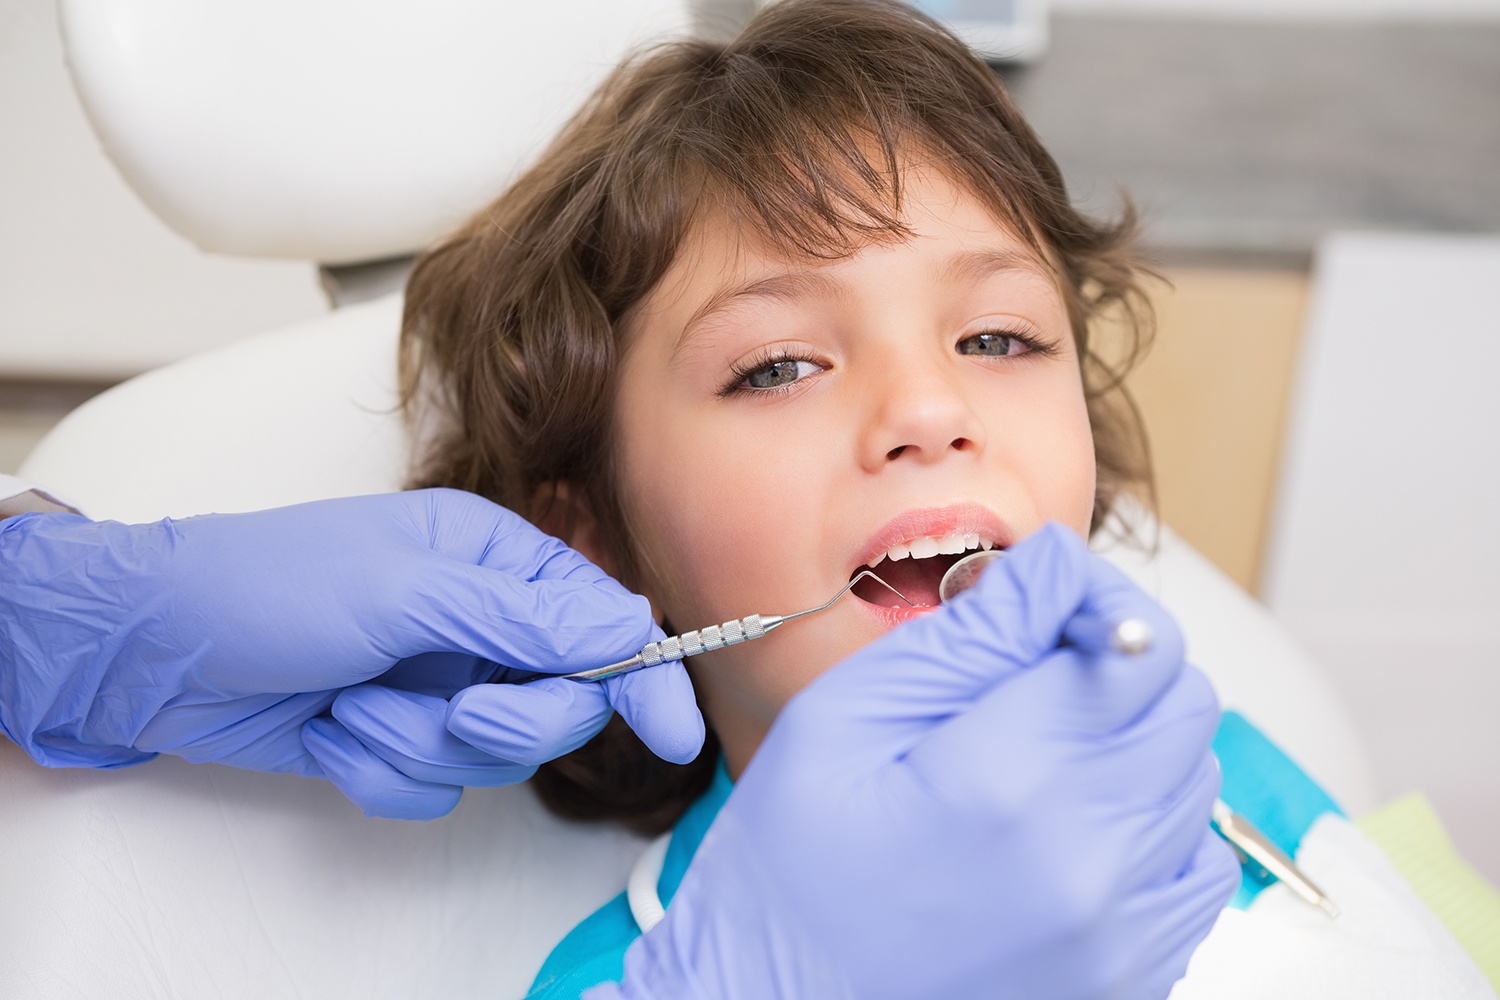 What to Expect at Your Child’s First Visit to the Dentist?